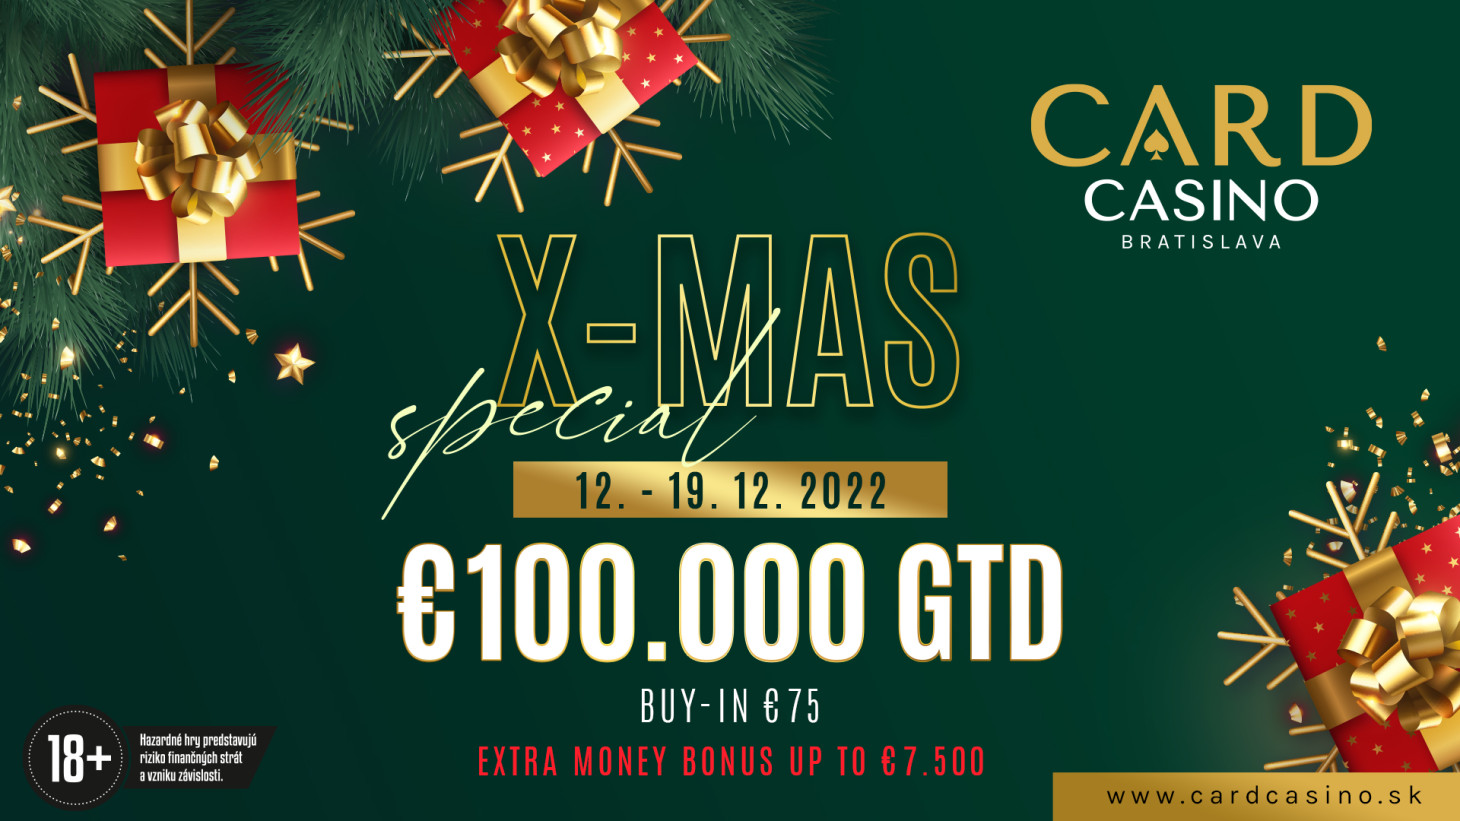 Get ready for a Card XMas Christmas with a €100,000 GTD tournament